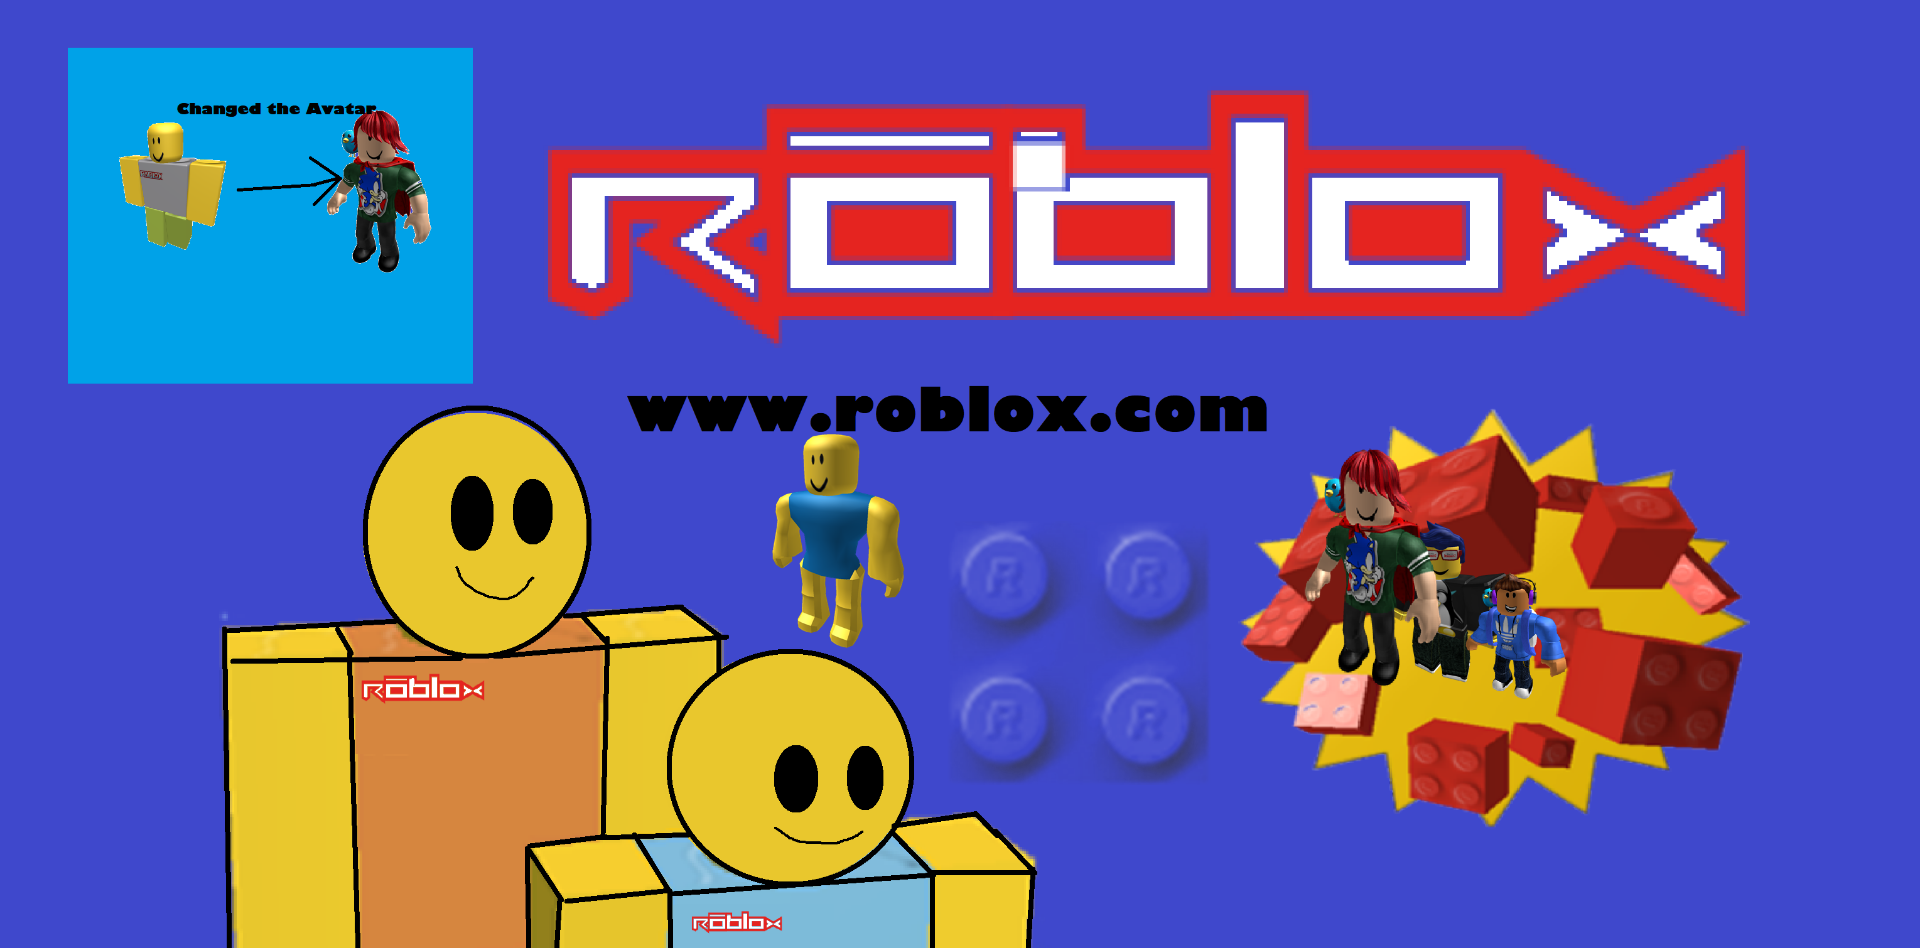 Roblox O Png - download roblox logo black and white old roblox logo vs new full size png image pngkit